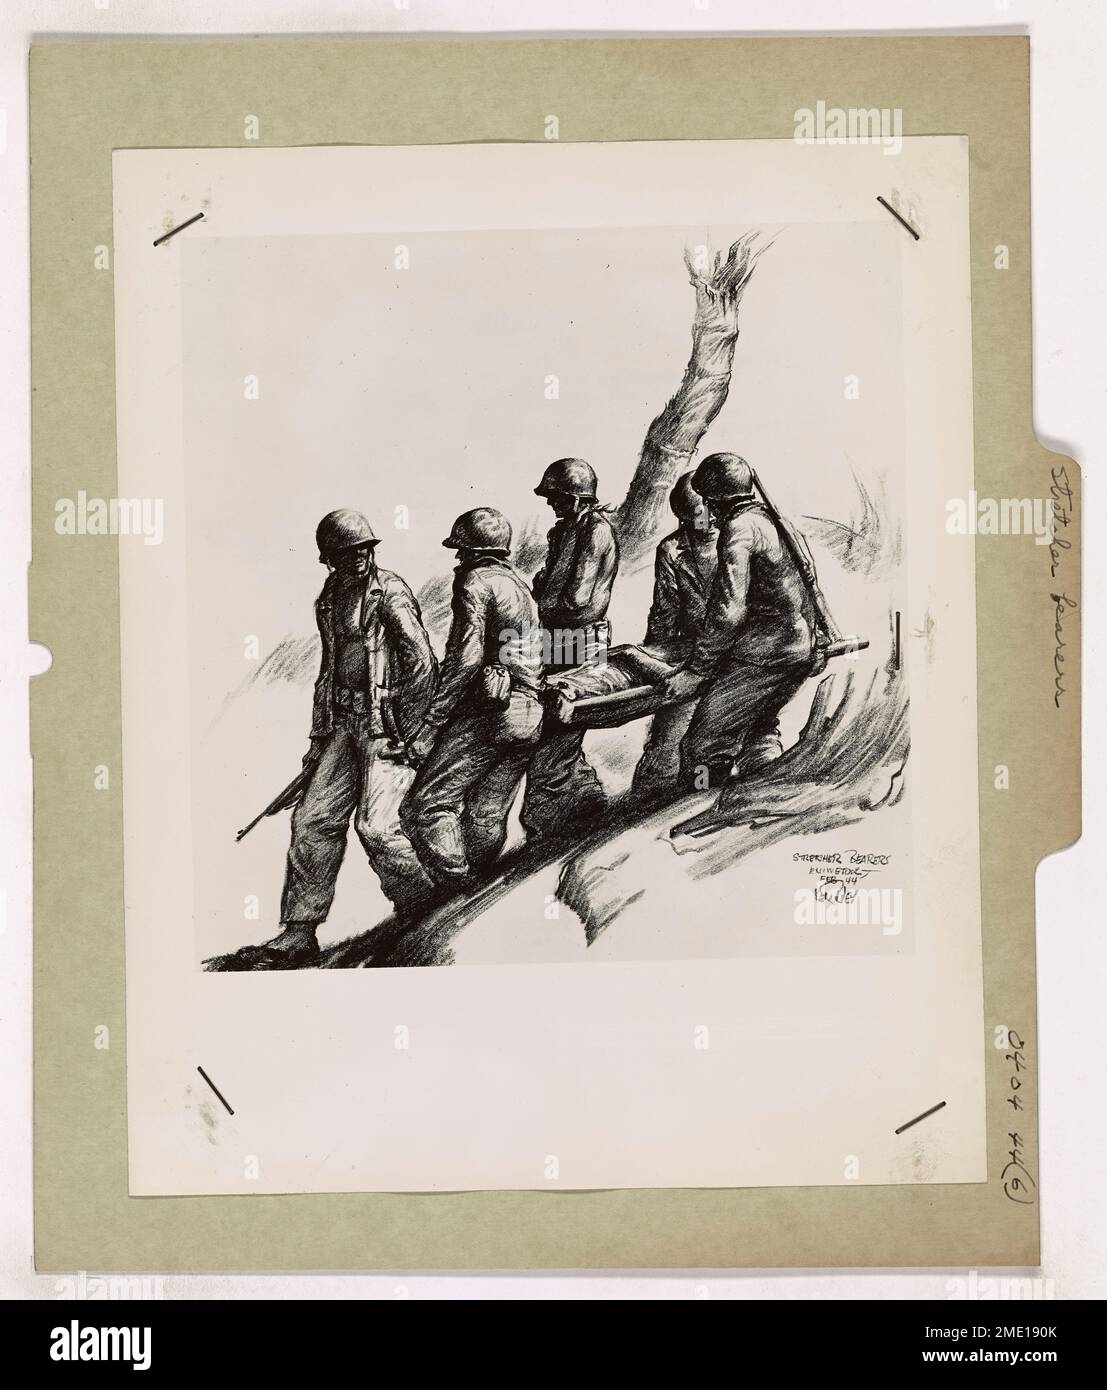 Stretcher Bearers. This image depicts a Coast Guard beach party carrying a wounded Marine on Engebi Island, Eniwetok Atoll, drawn by Coast Guard Combat Artist Ken Riley. Stock Photo